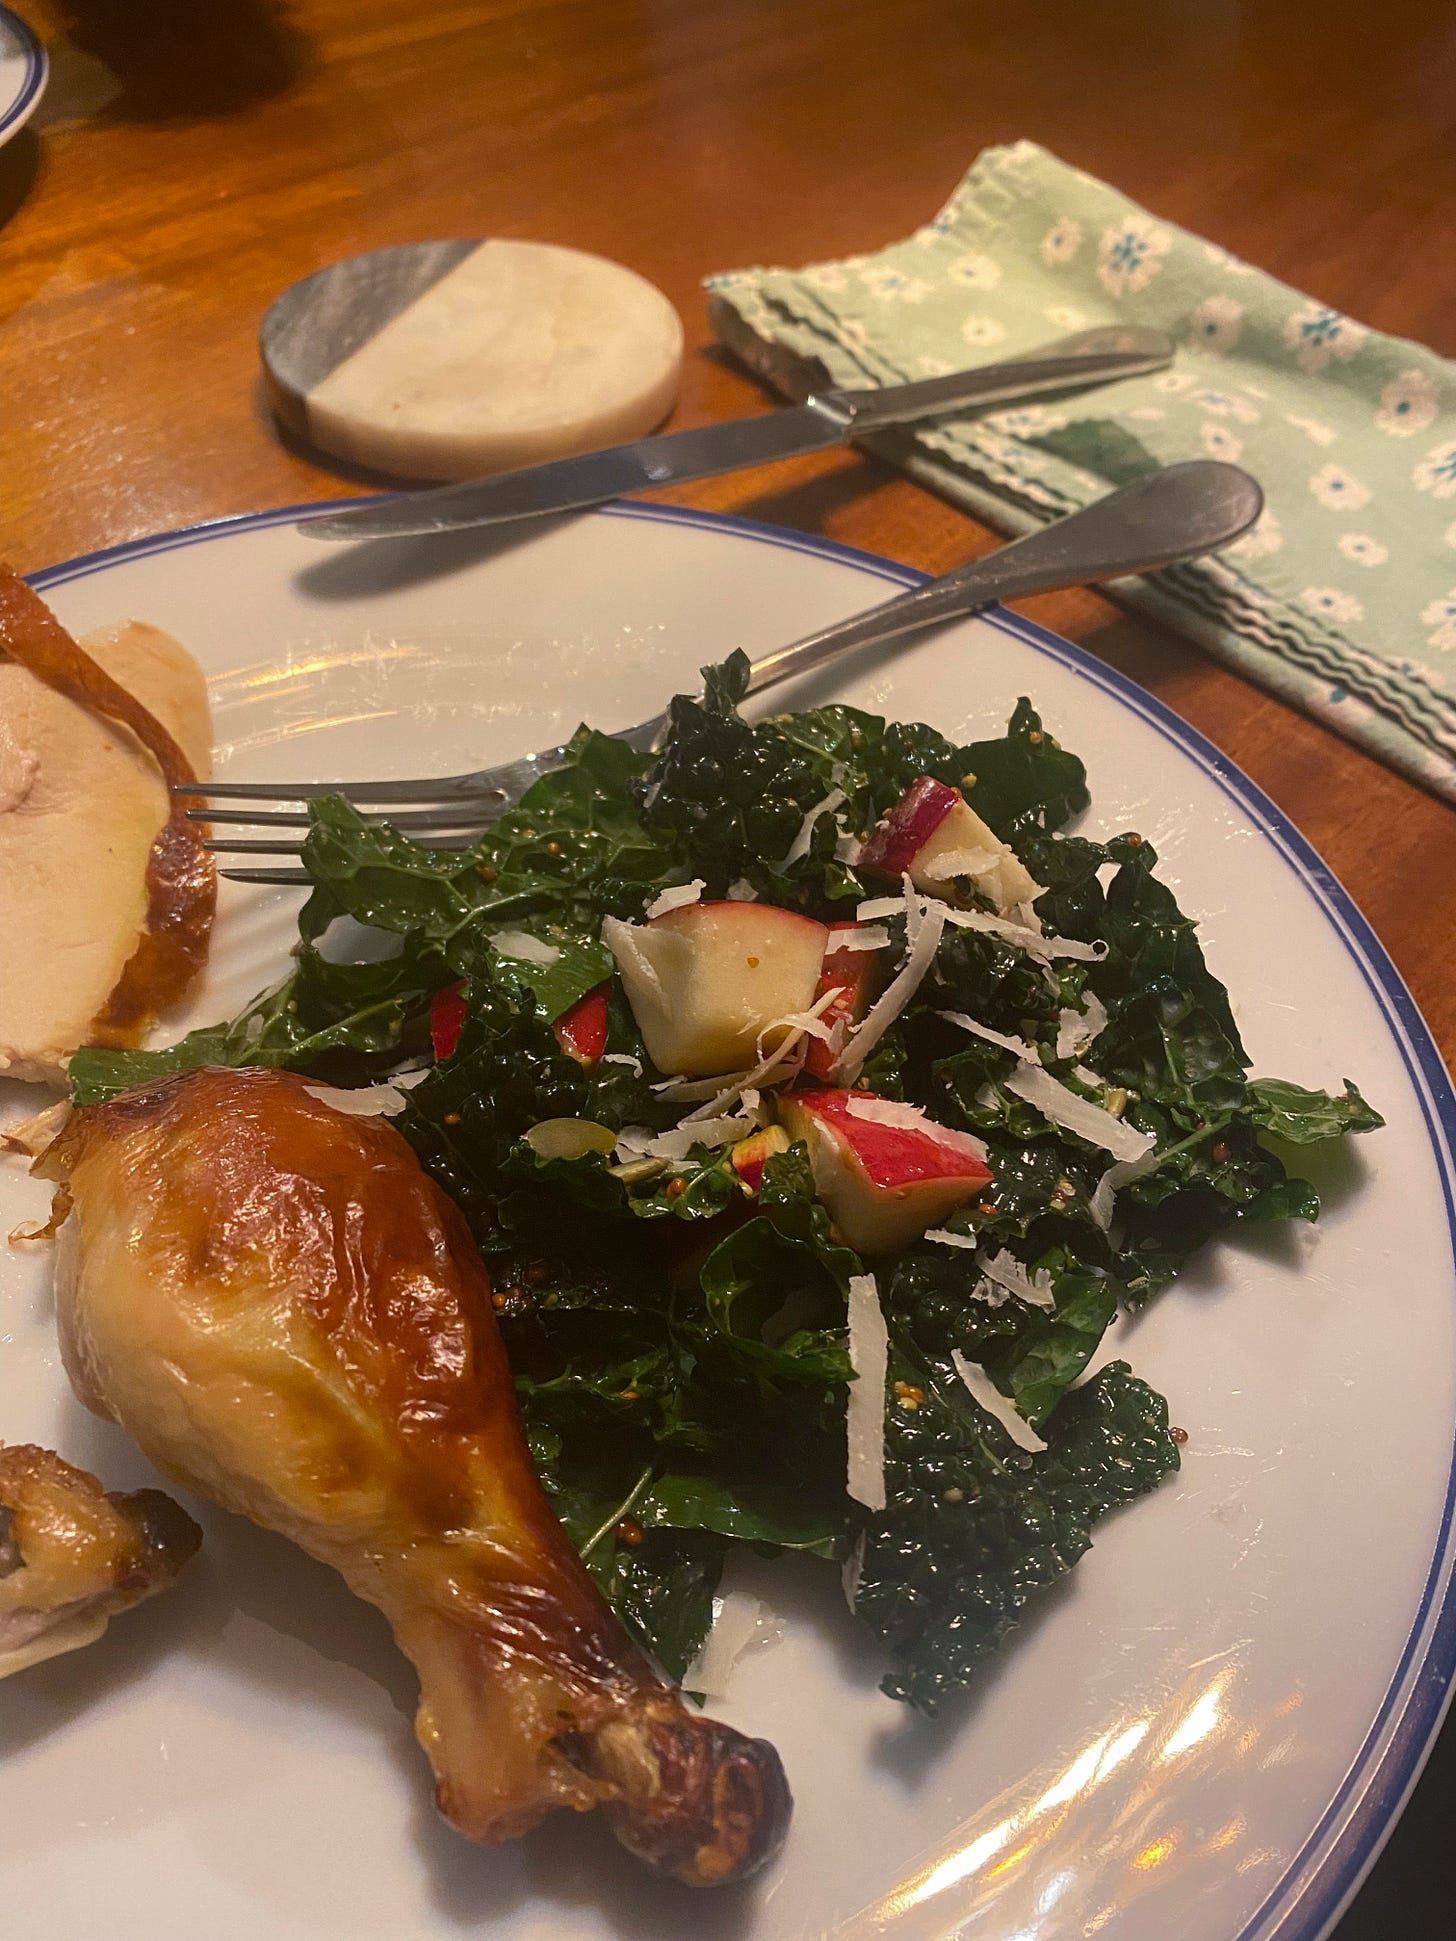 On a white dinner plate with a blue rim is a chicken drumstick and a bit more of the meat visible at the left side of the frame. To the right of the chicken is a lacinato kale salad with red-skinned apple pieces, pepitas, and coarsely grated pecorino.